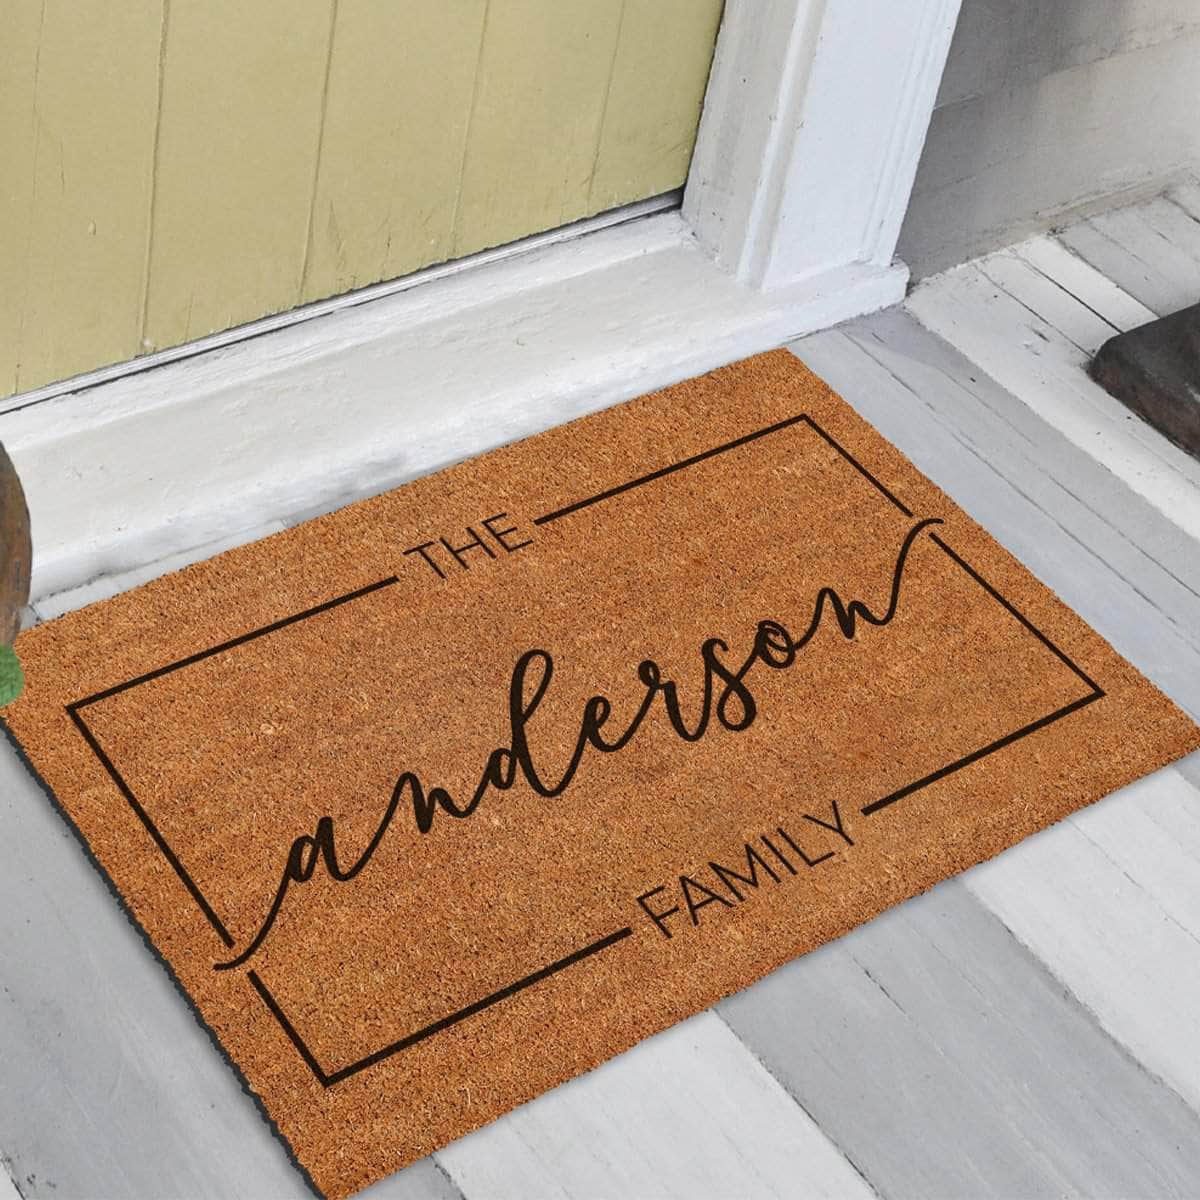 Personalized Doormat With Family Name - Last Name Doormat